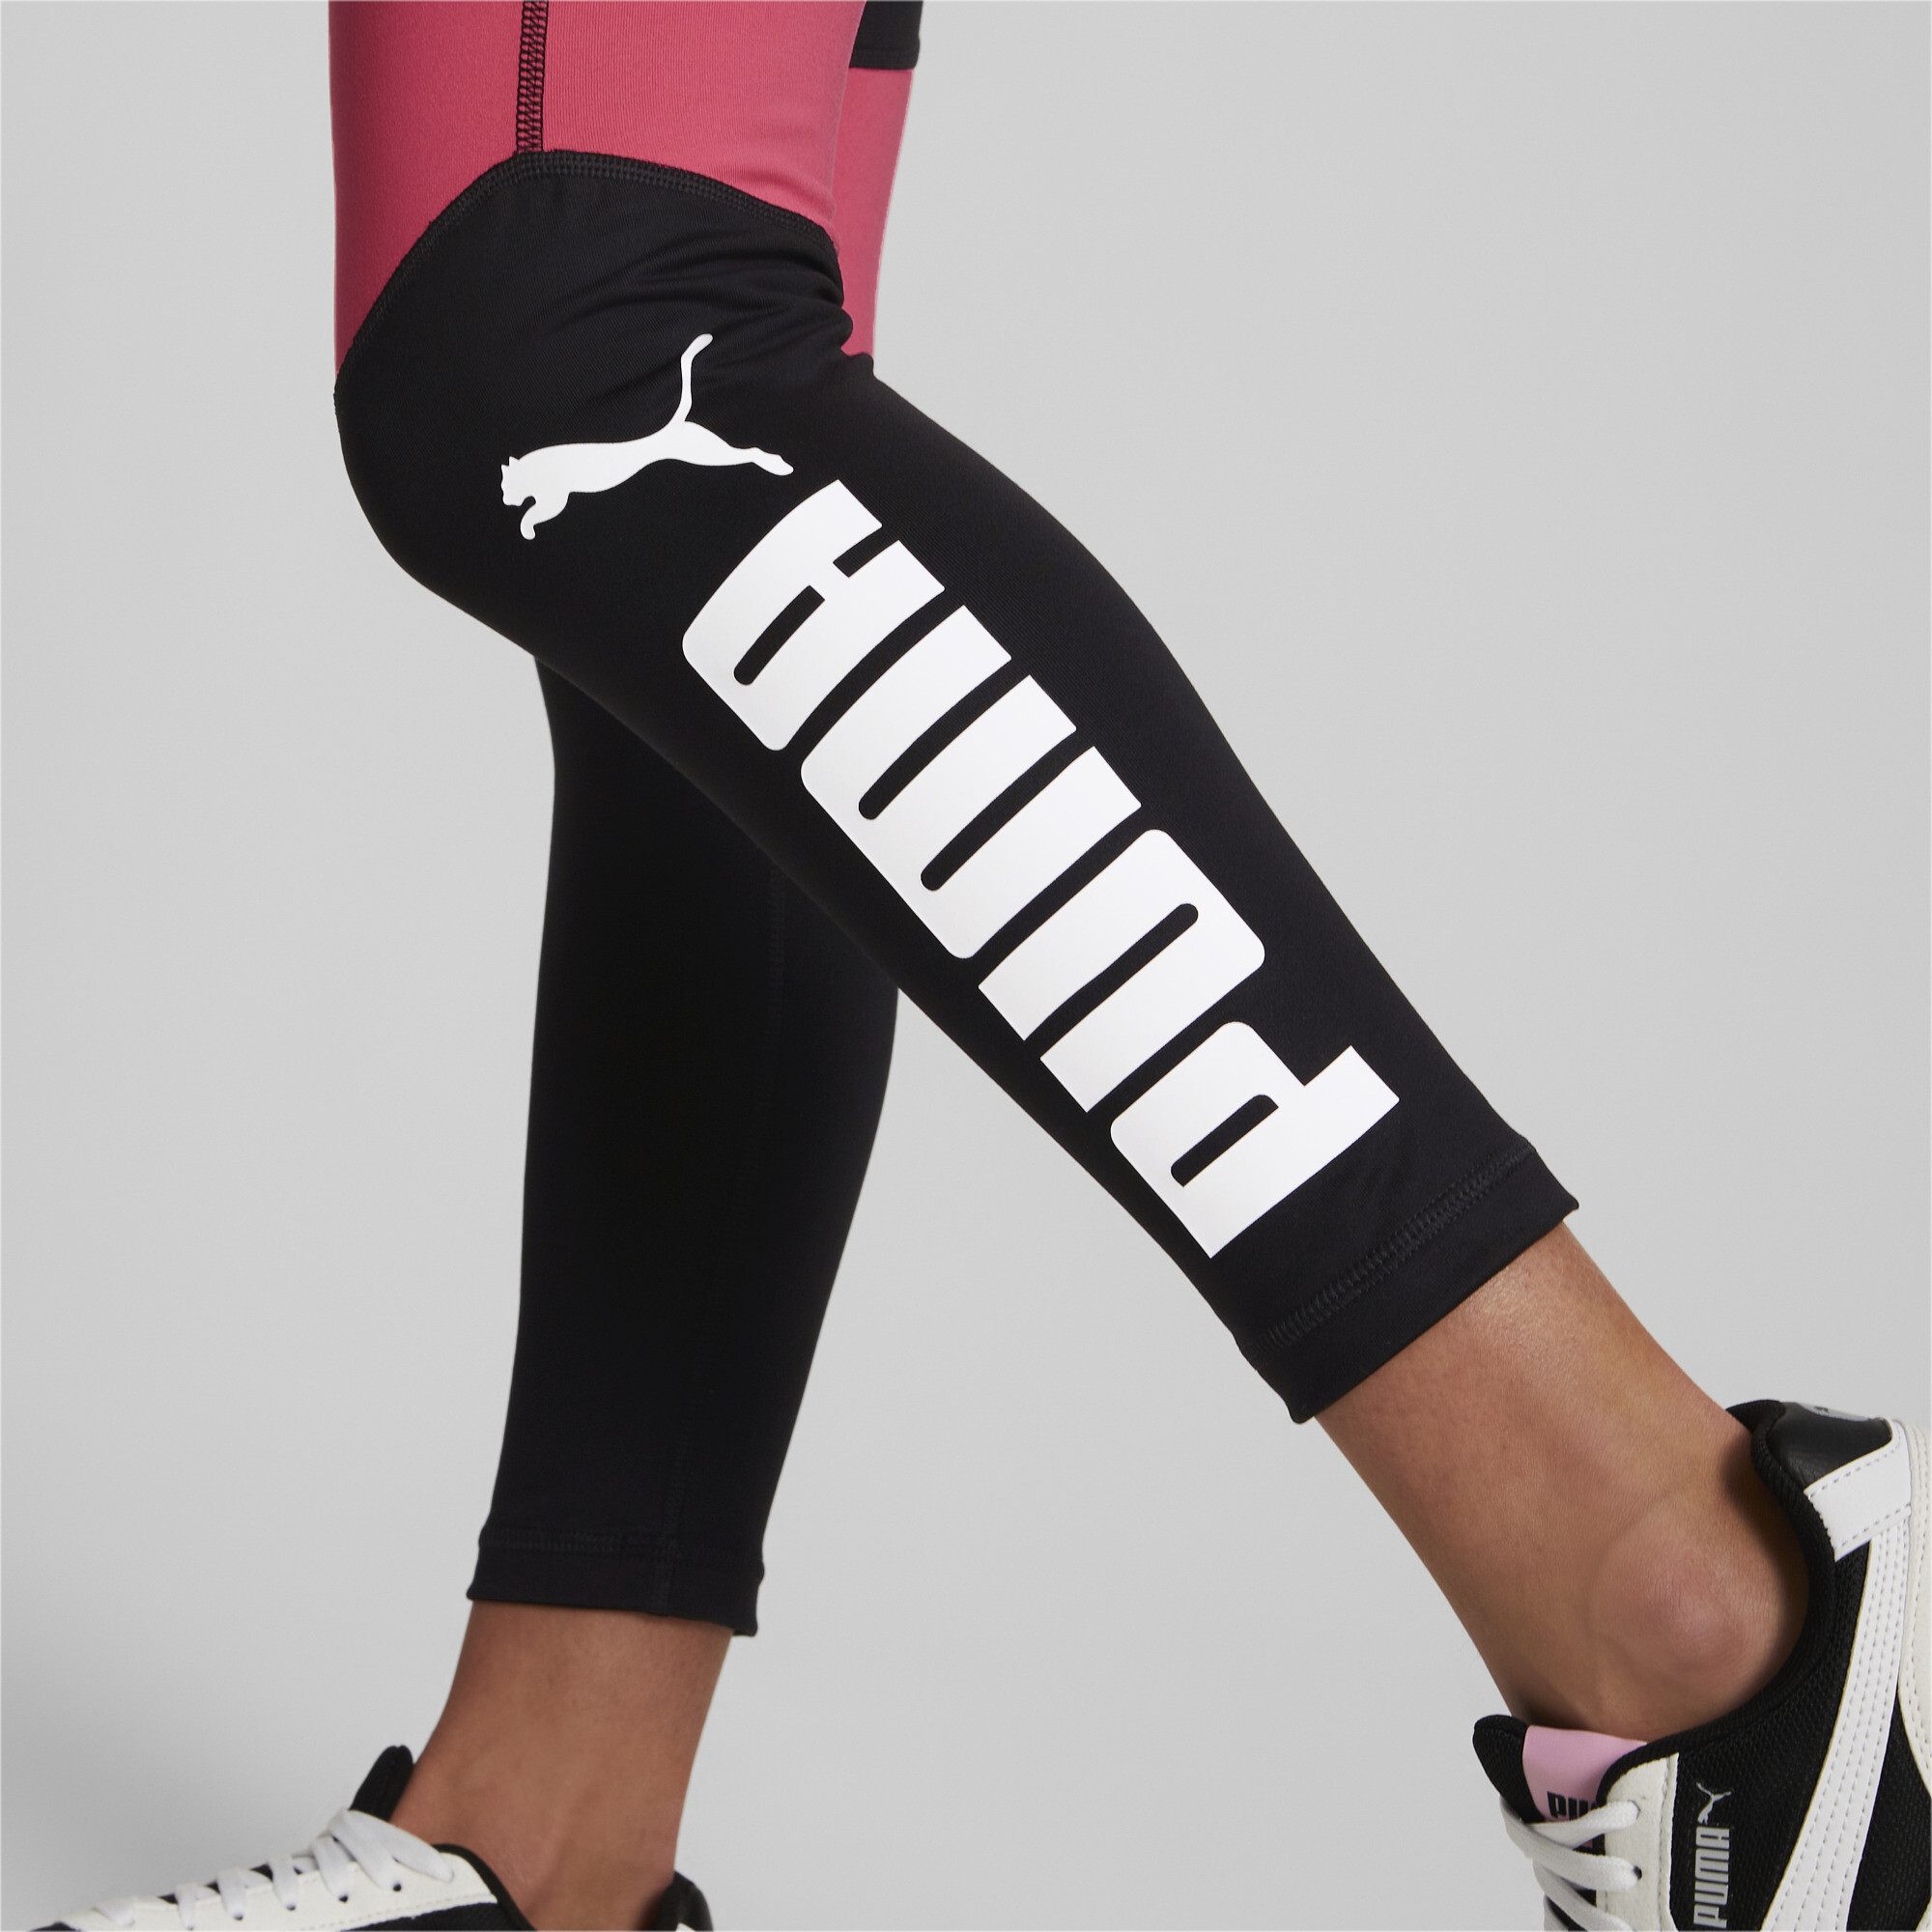 PUMA Favourites Logo High Waisted 7/8 Leggings In Pink, Size 11-12 Youth